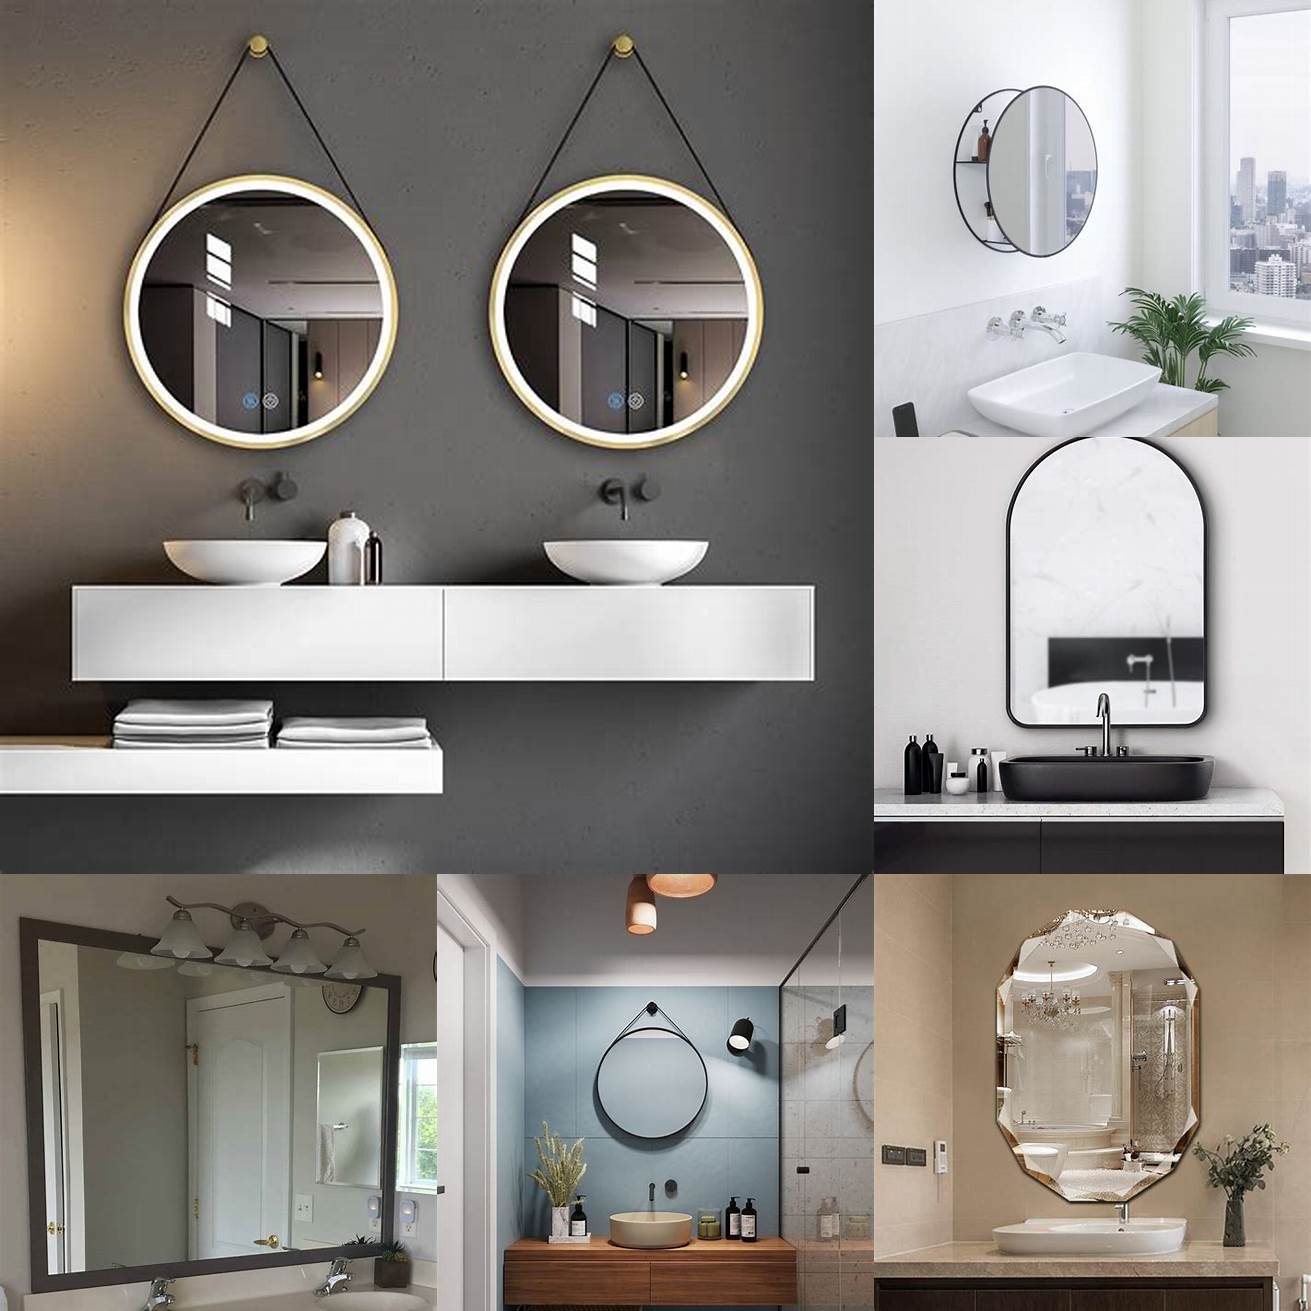 Minimalistic mirrors give a clean and simple look to your bathroom